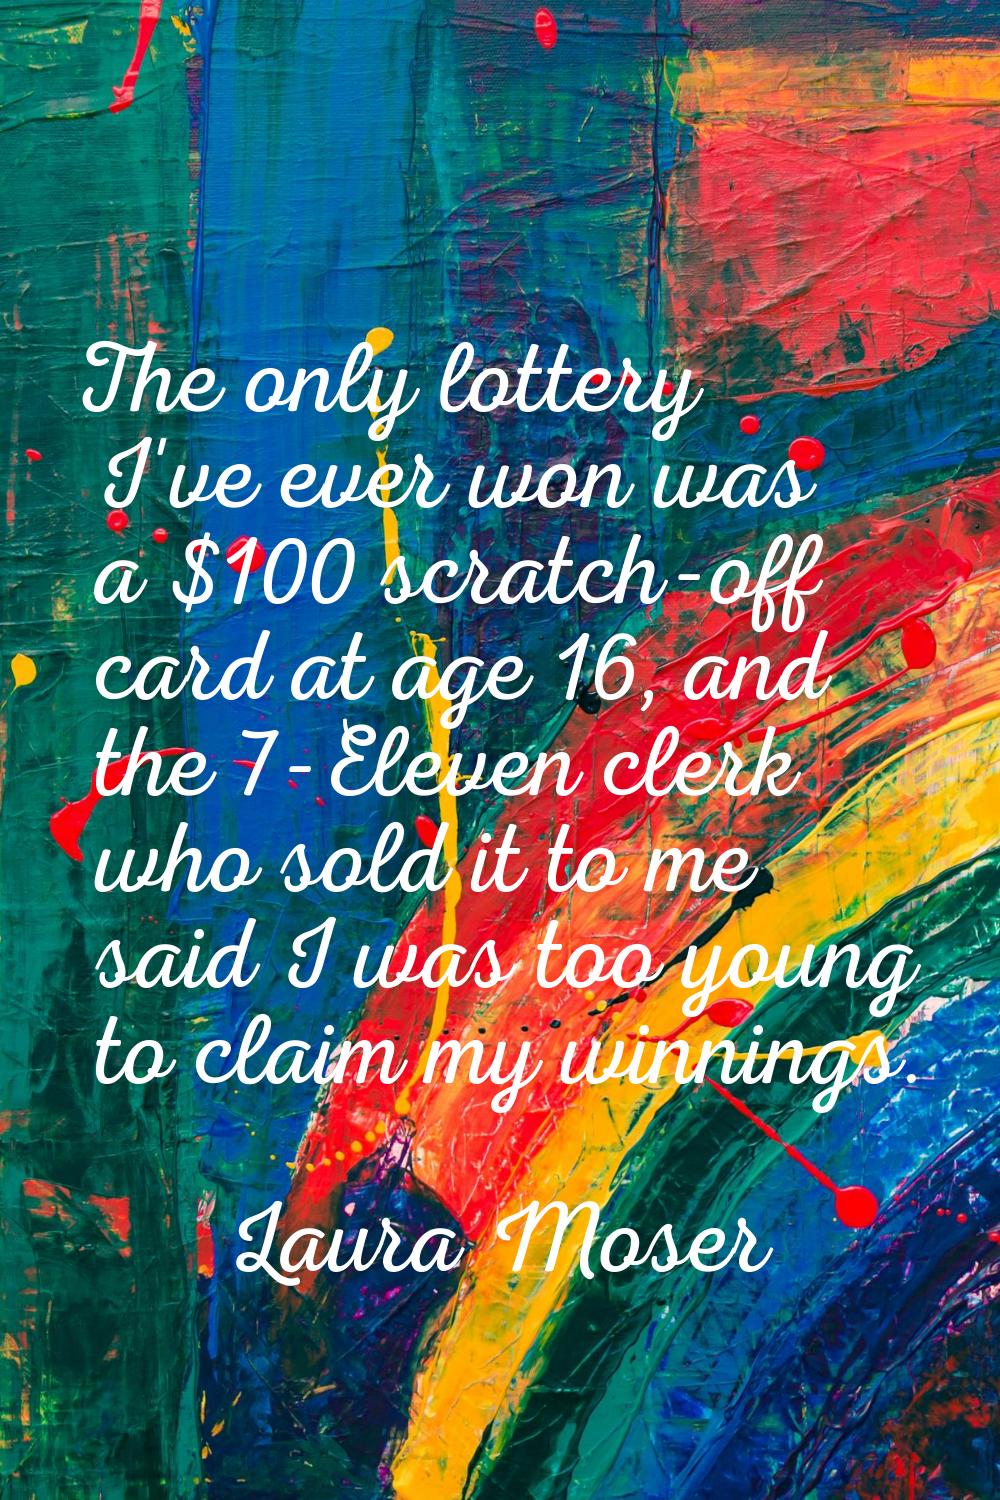 The only lottery I've ever won was a $100 scratch-off card at age 16, and the 7-Eleven clerk who so